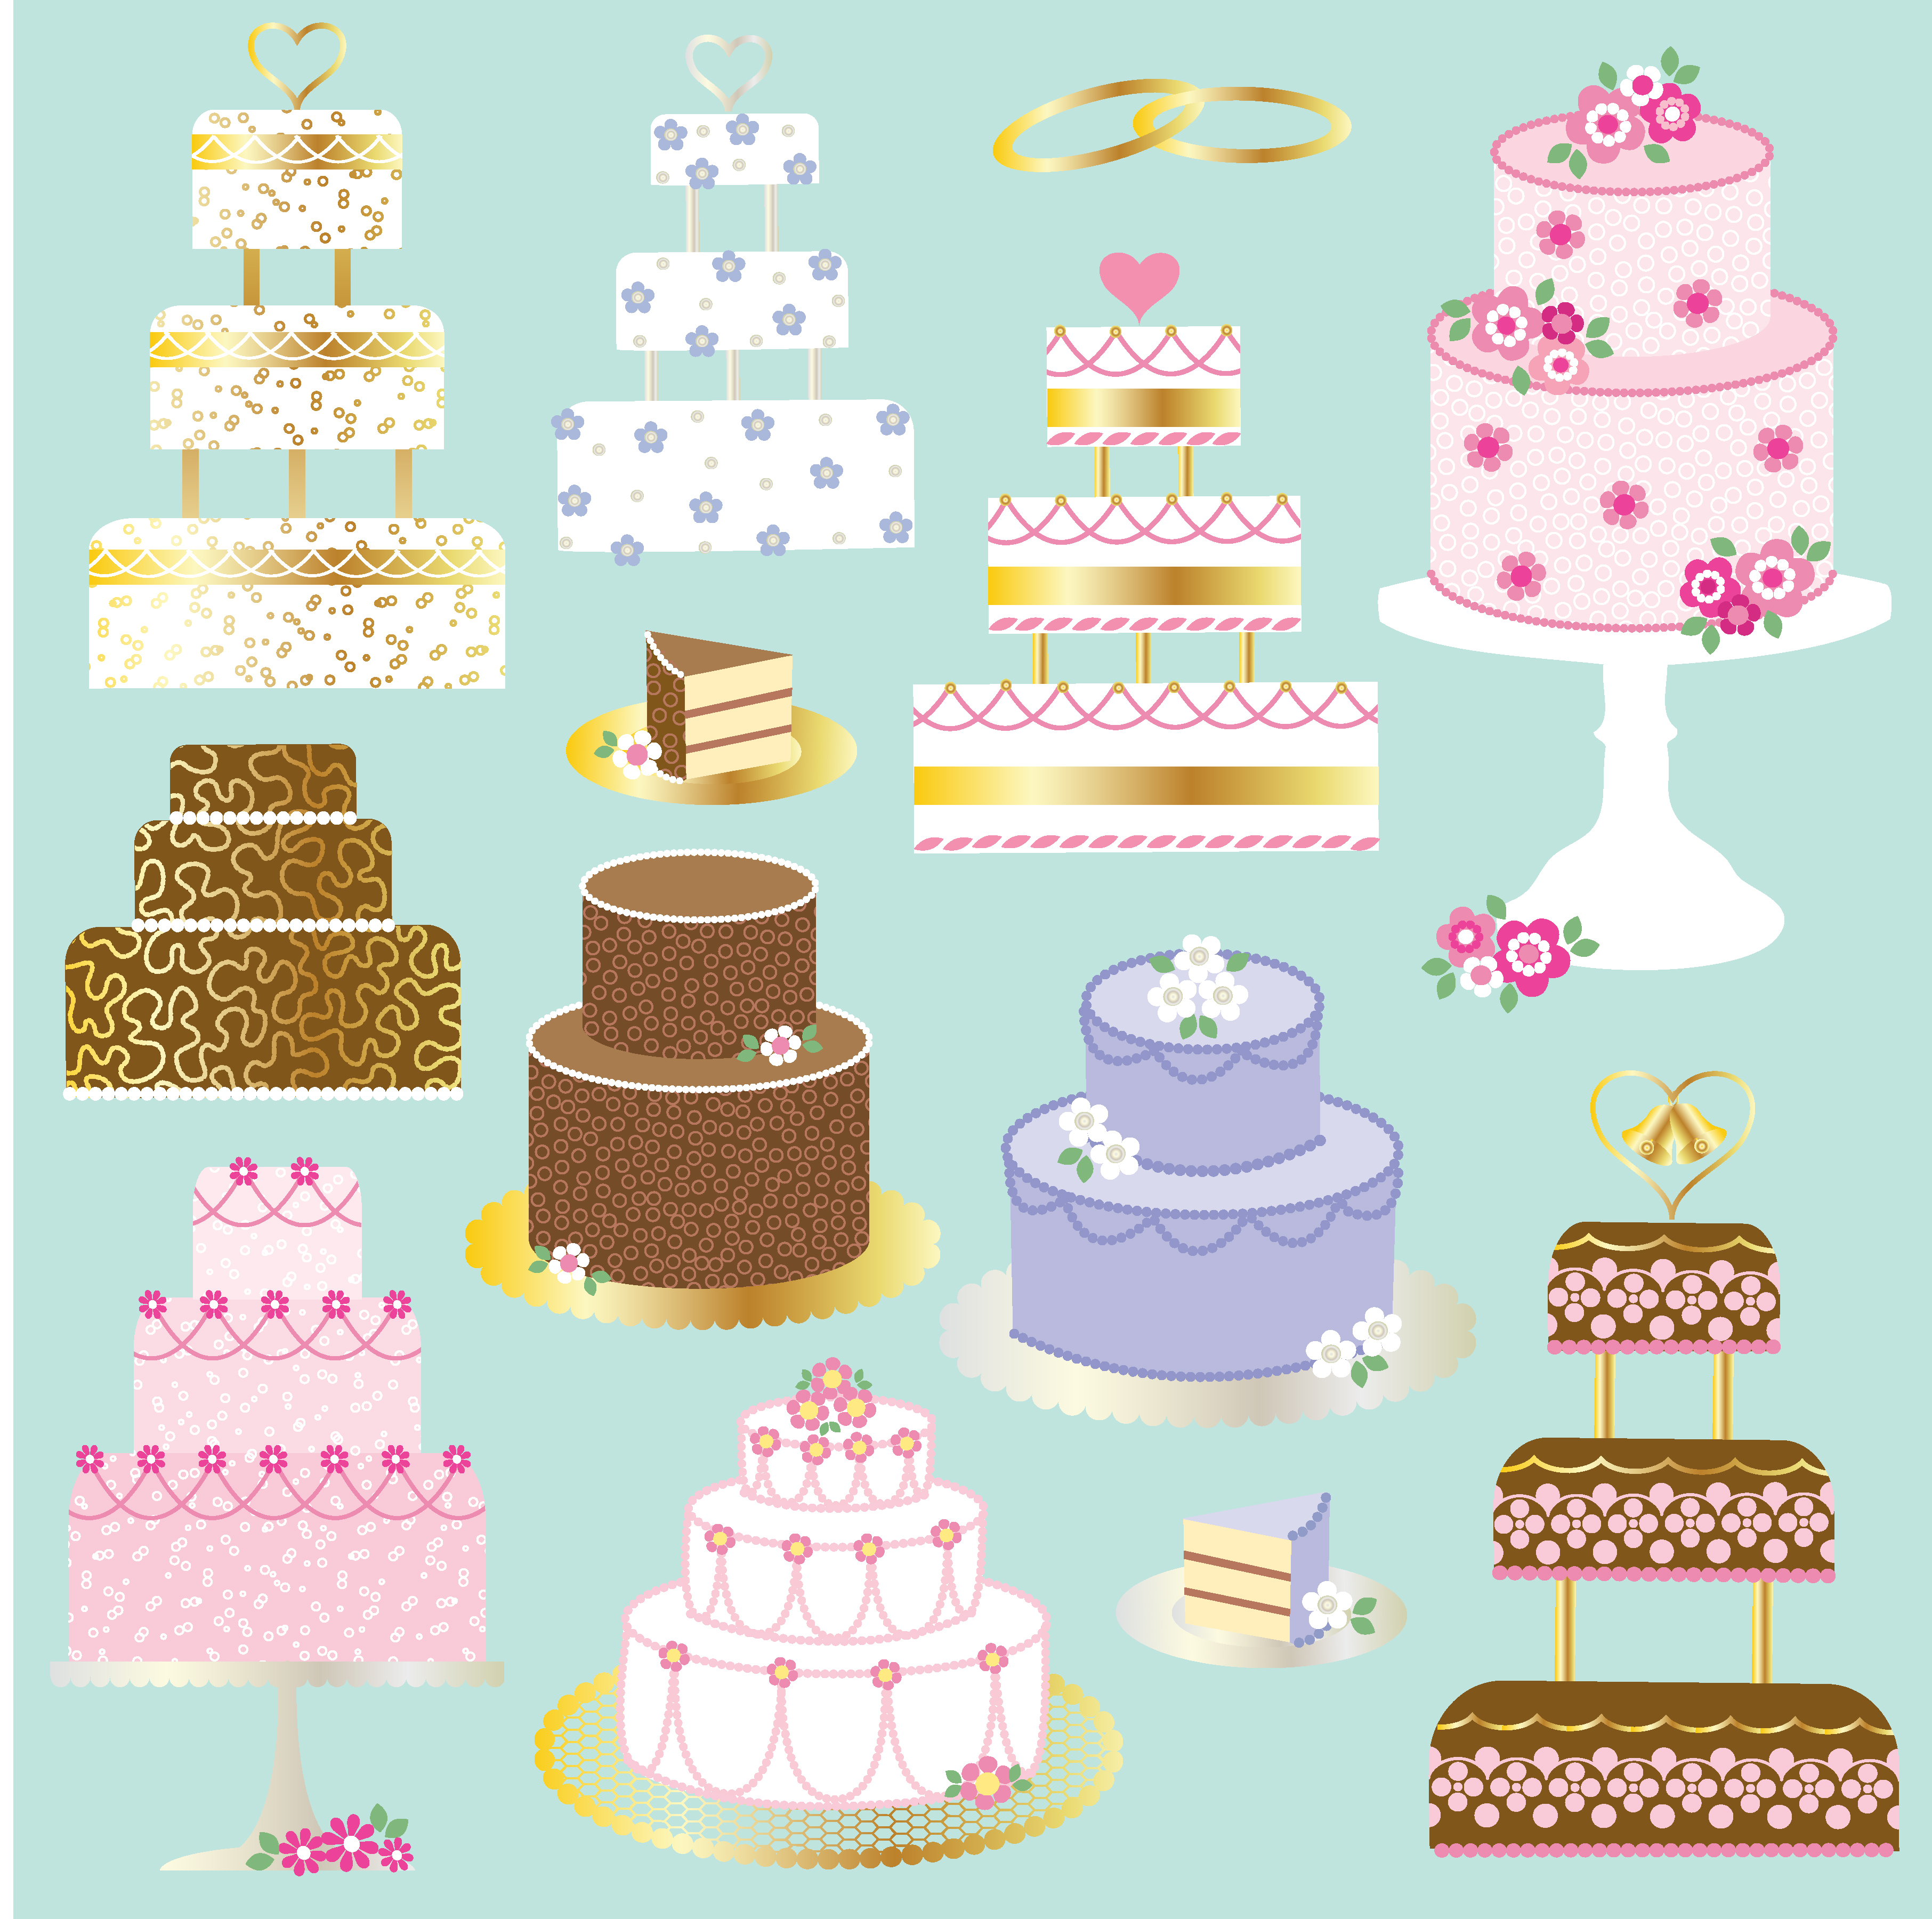 Download wedding cakes clipart graphics 335260 - Download Free ...